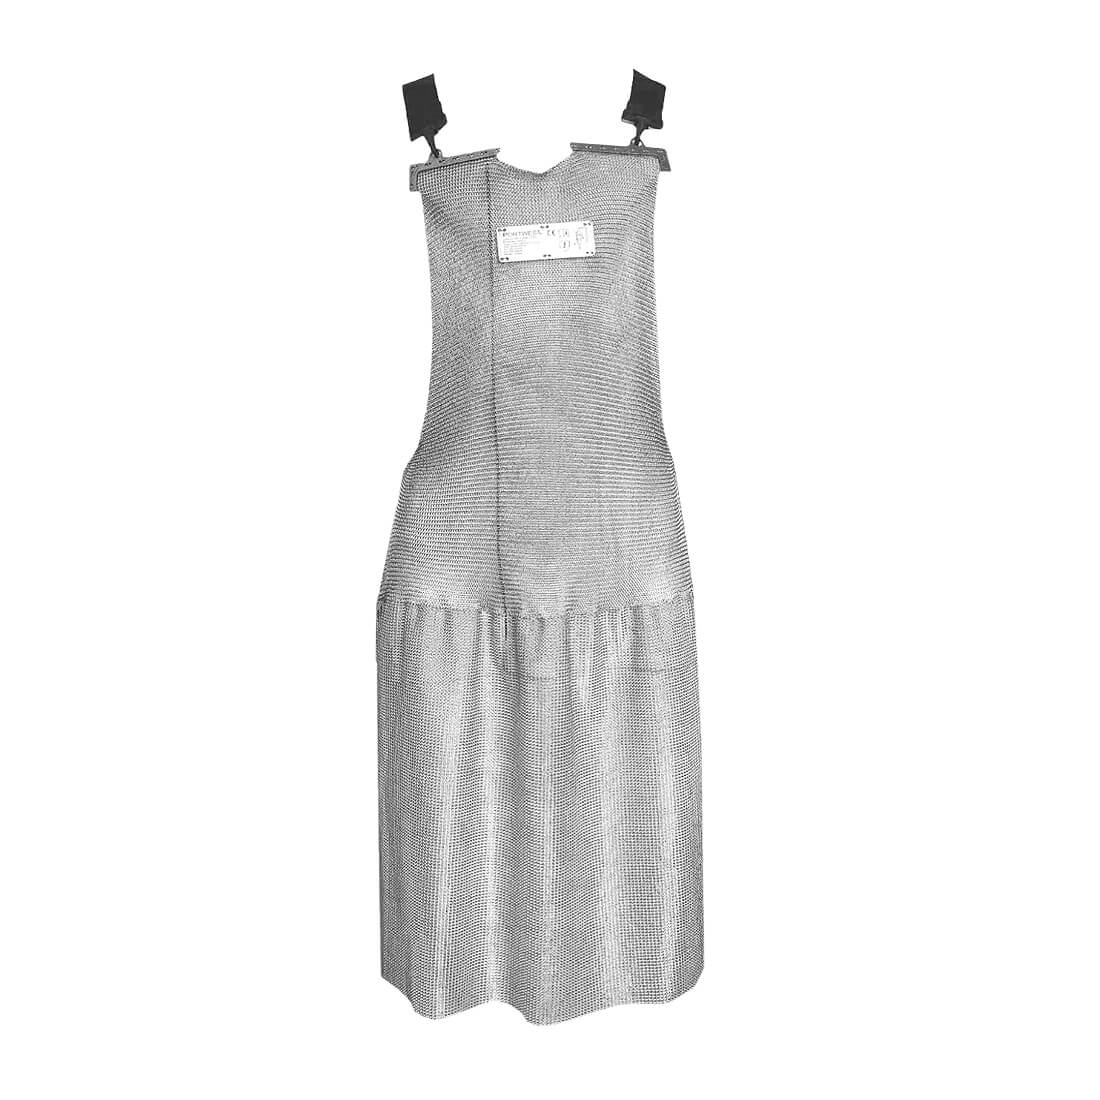 Chainmail Apron - Silver